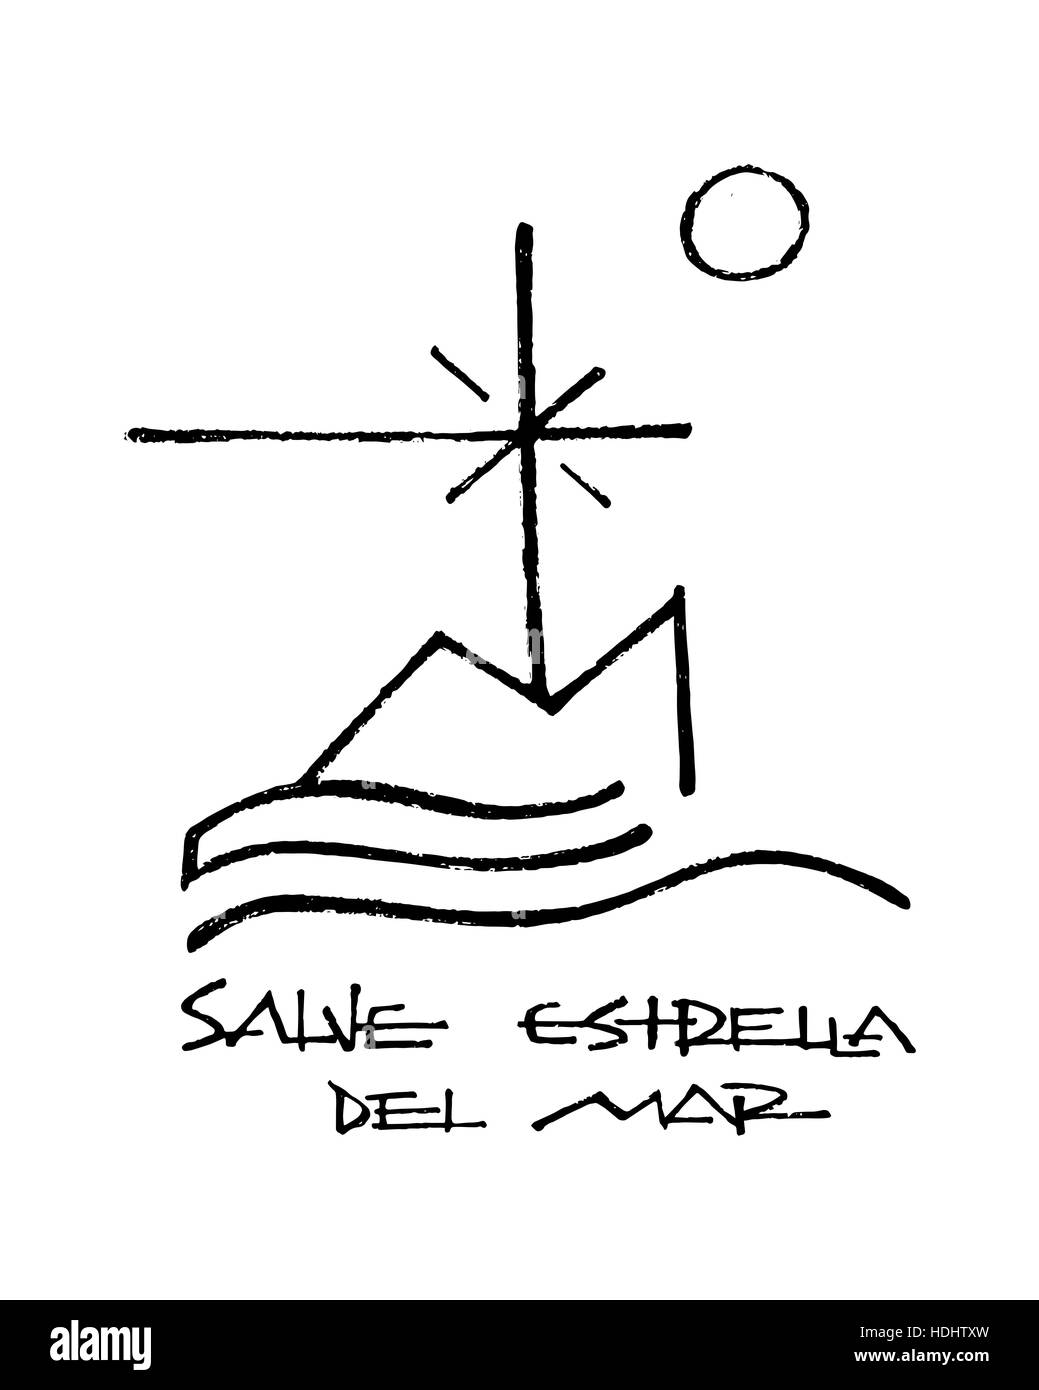 Hand drawn vector illustration or drawing of a religious symbol that represents Virgin Mary and a phrase in spanish that says: Salve Estrella del Mar, Stock Photo